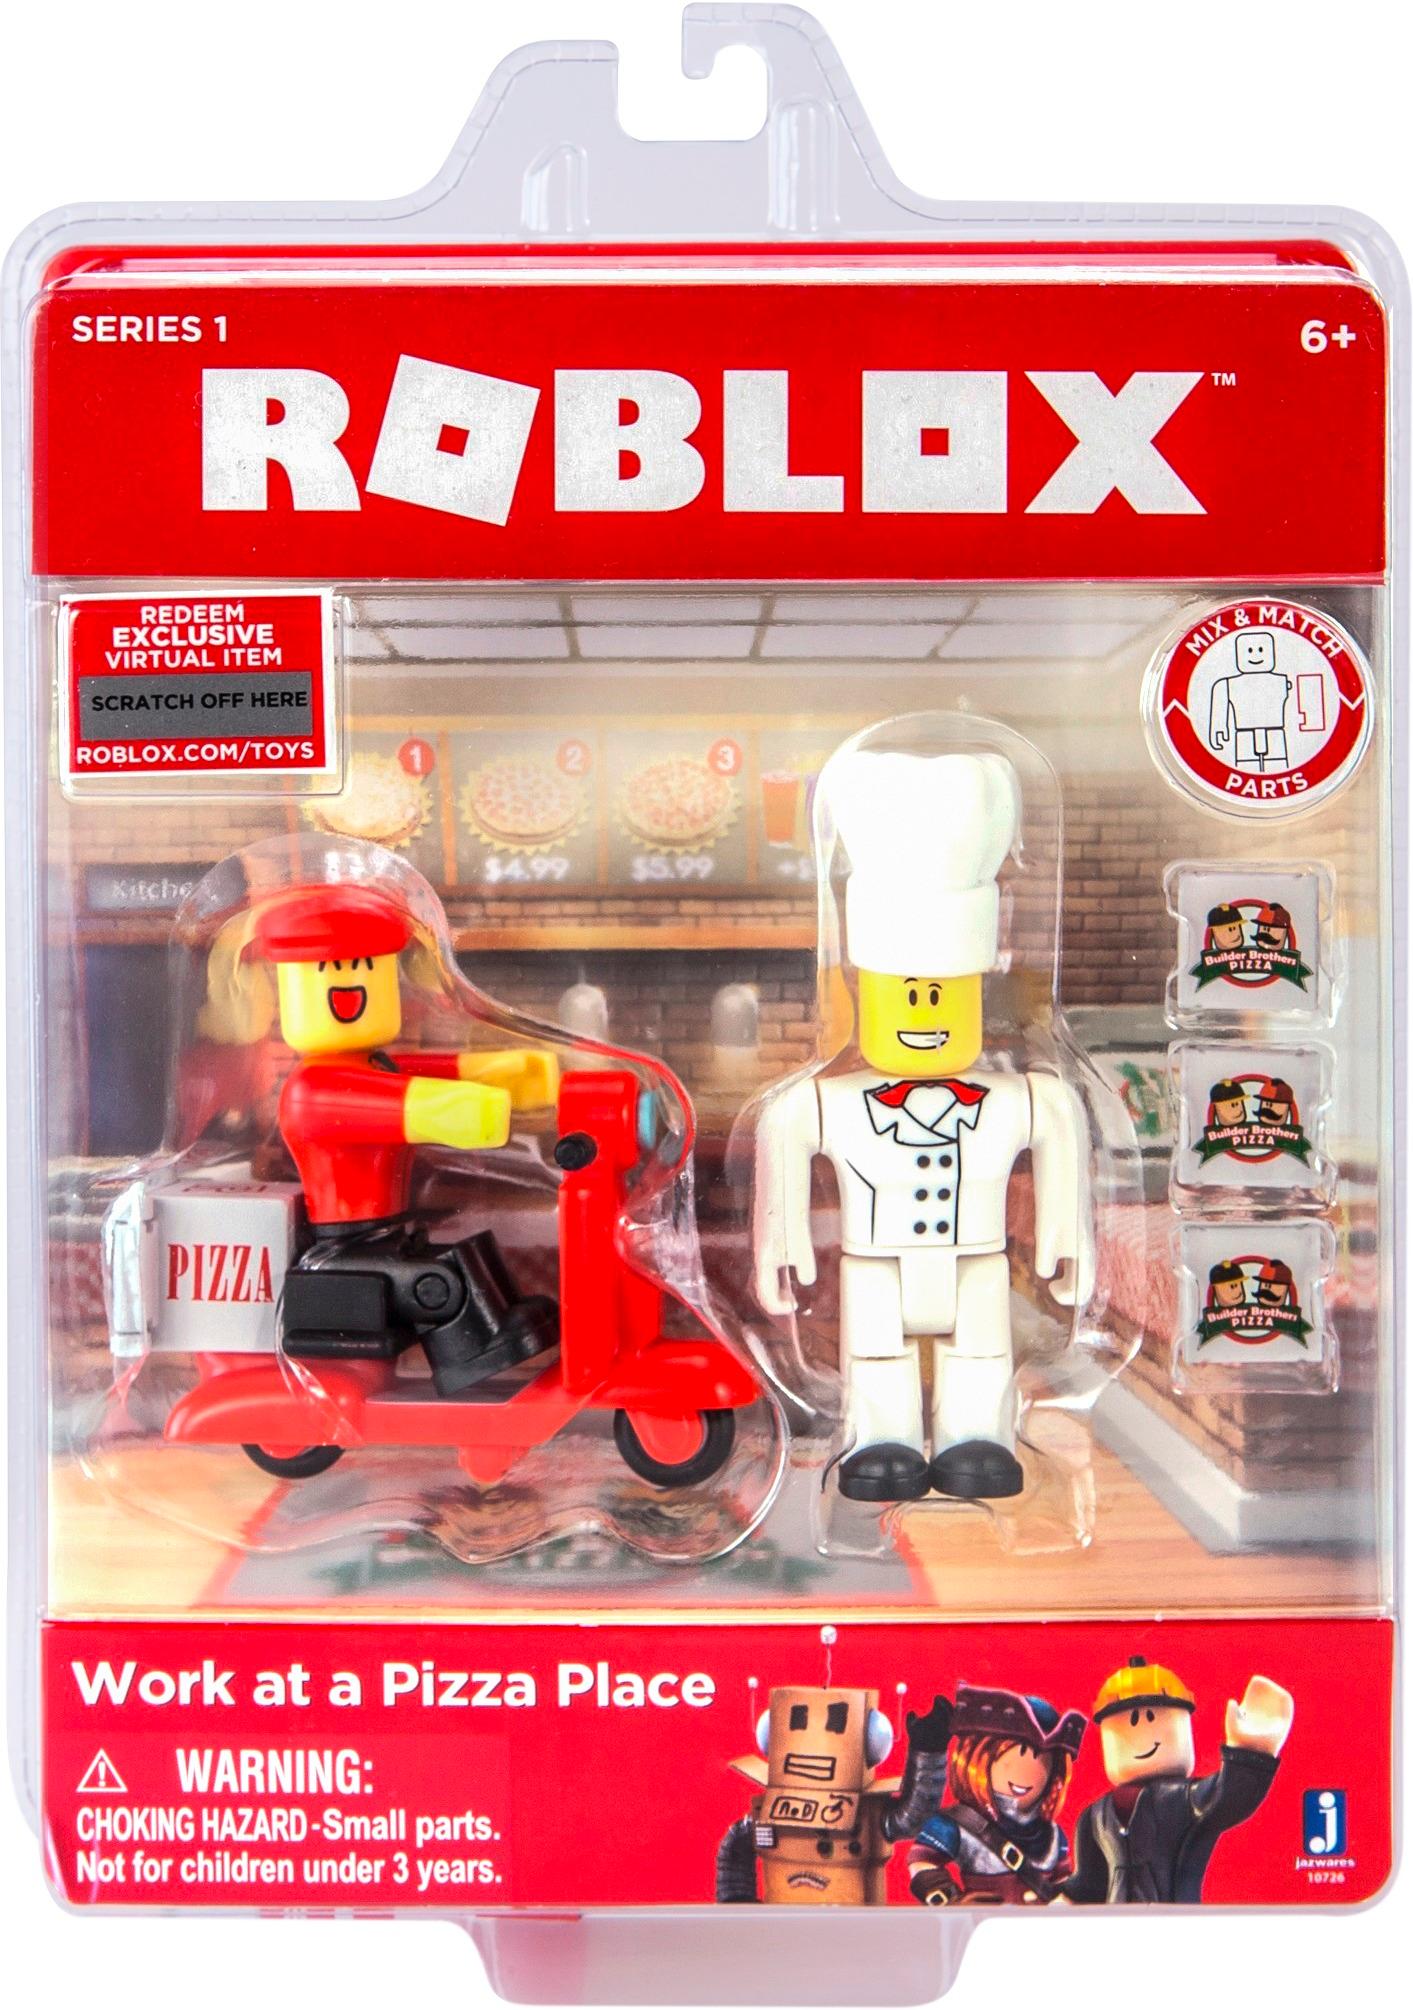 Roblox Game Pack Styles May Vary Deal Brickseek - roblox series 6 mystery figure styles may vary